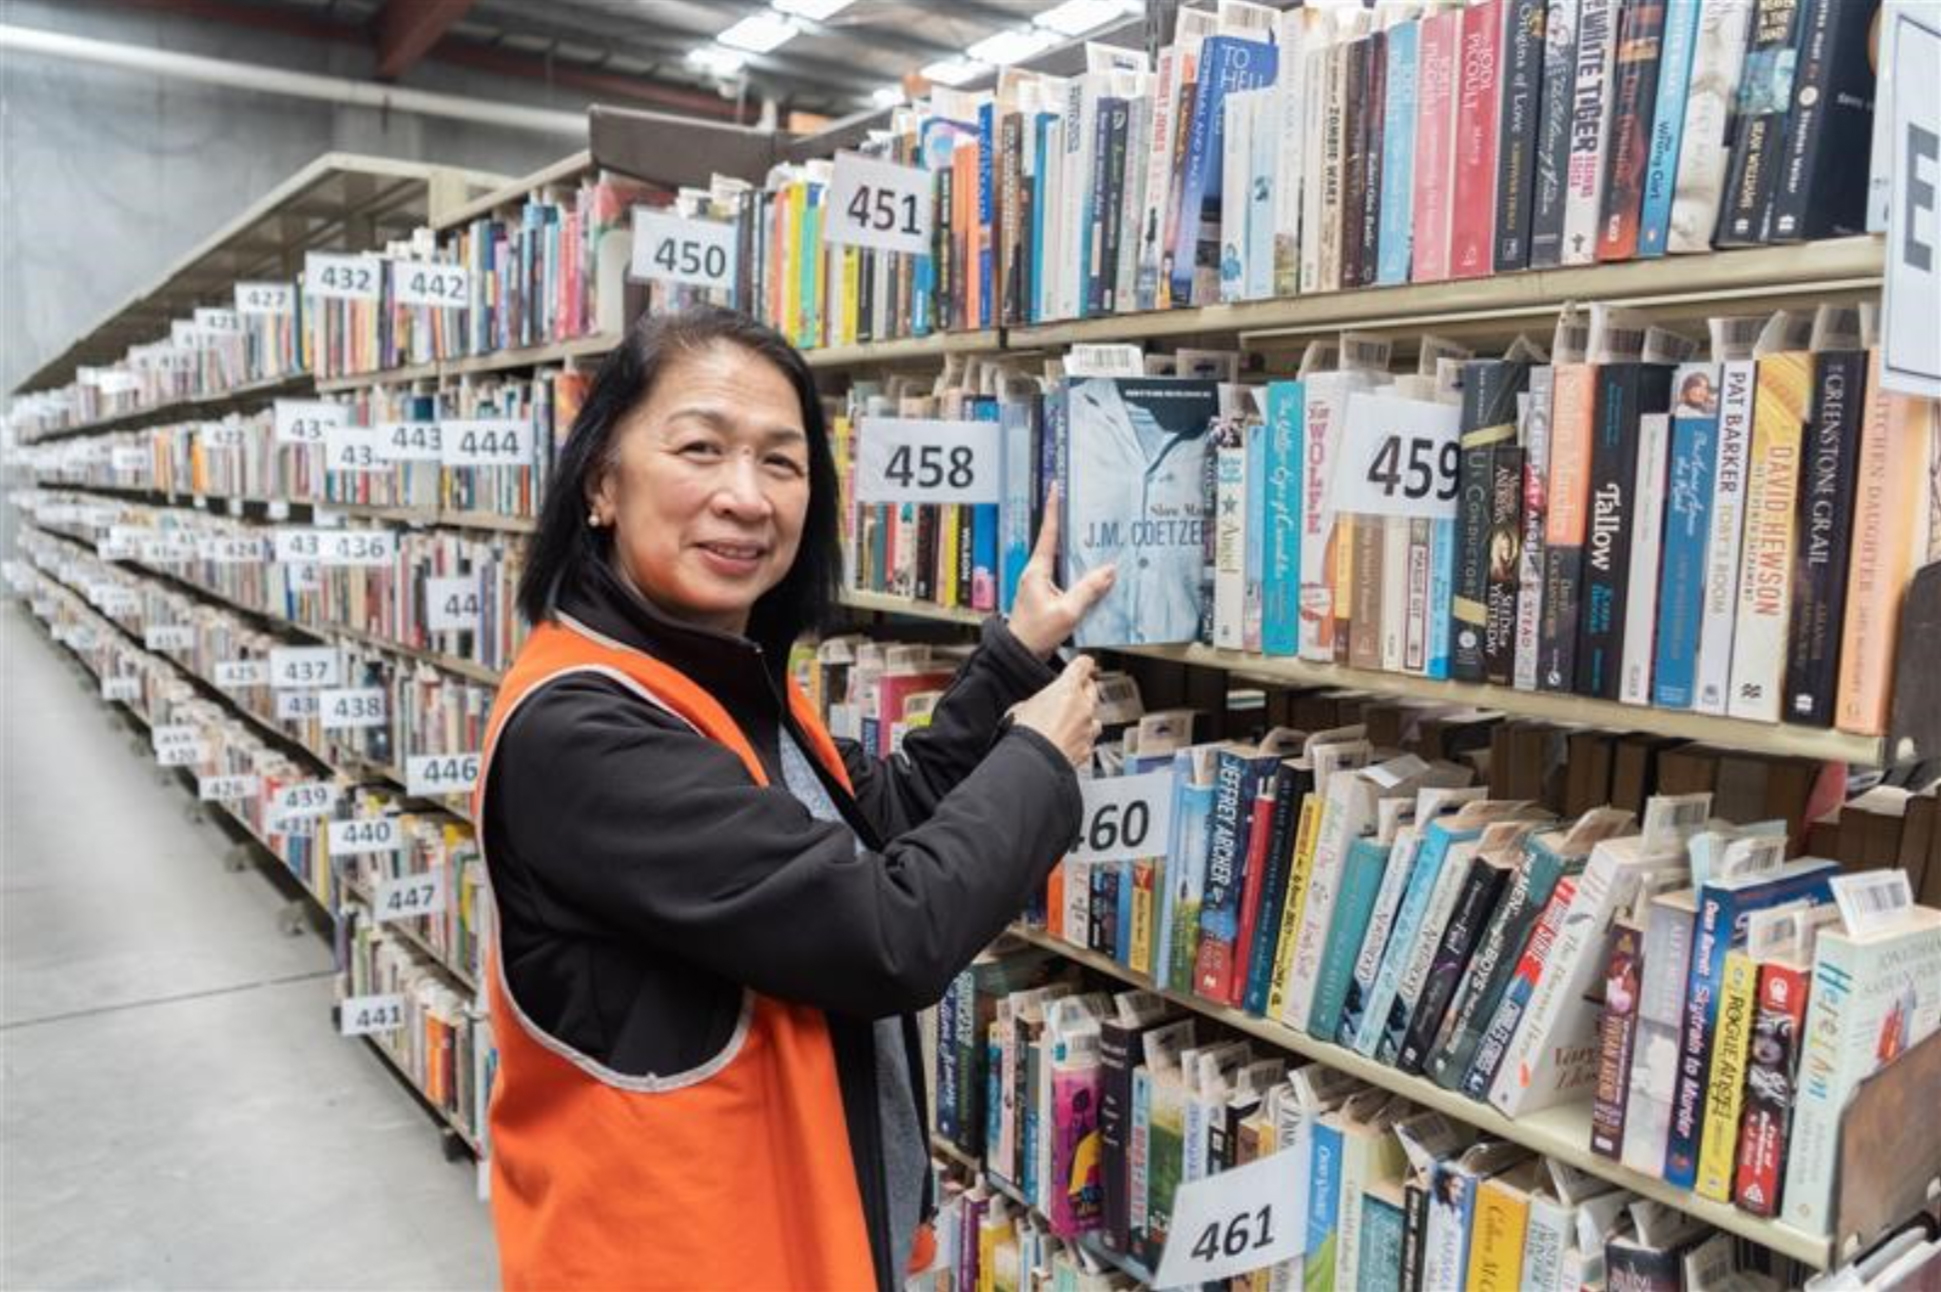 Marilou Belleza holding a book at the new Brotherhood Books warehouse. Behind her are rows of loaded bookshelves